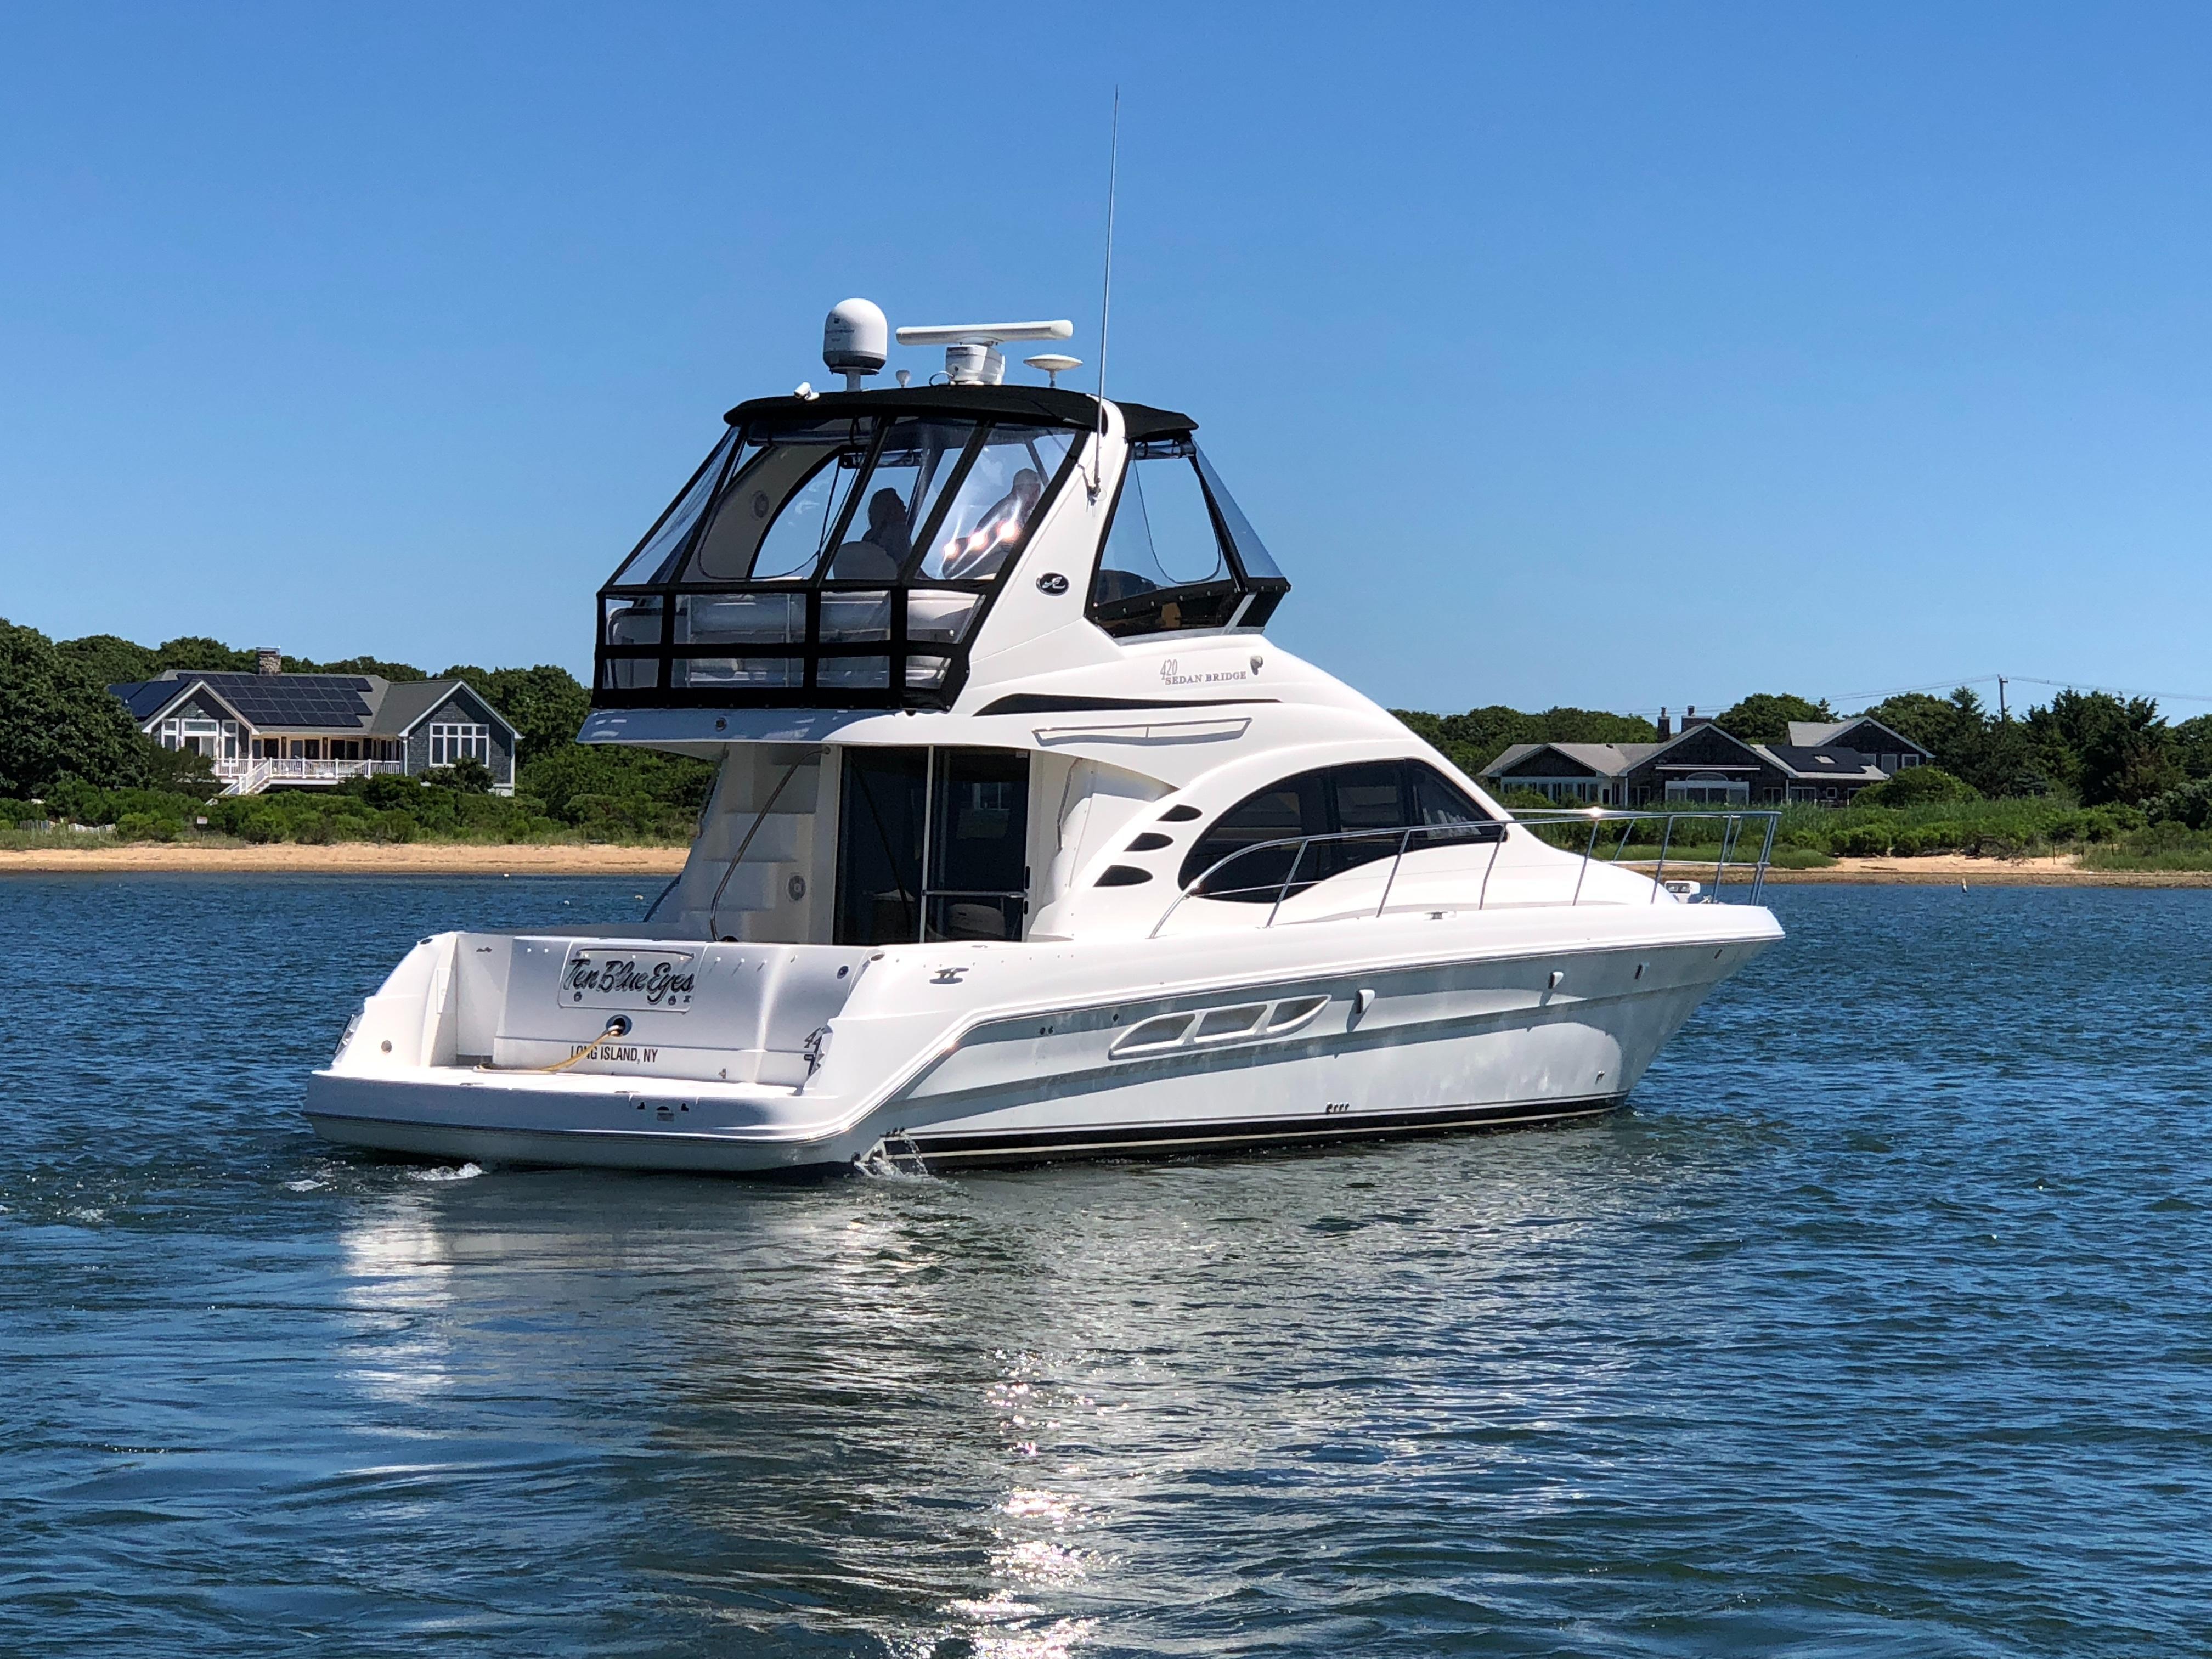 42 Sea Ray 2005 Ten Blue Eyes Shelter Island, New York Sold on 2019-06-05  by Denison Yacht Sales